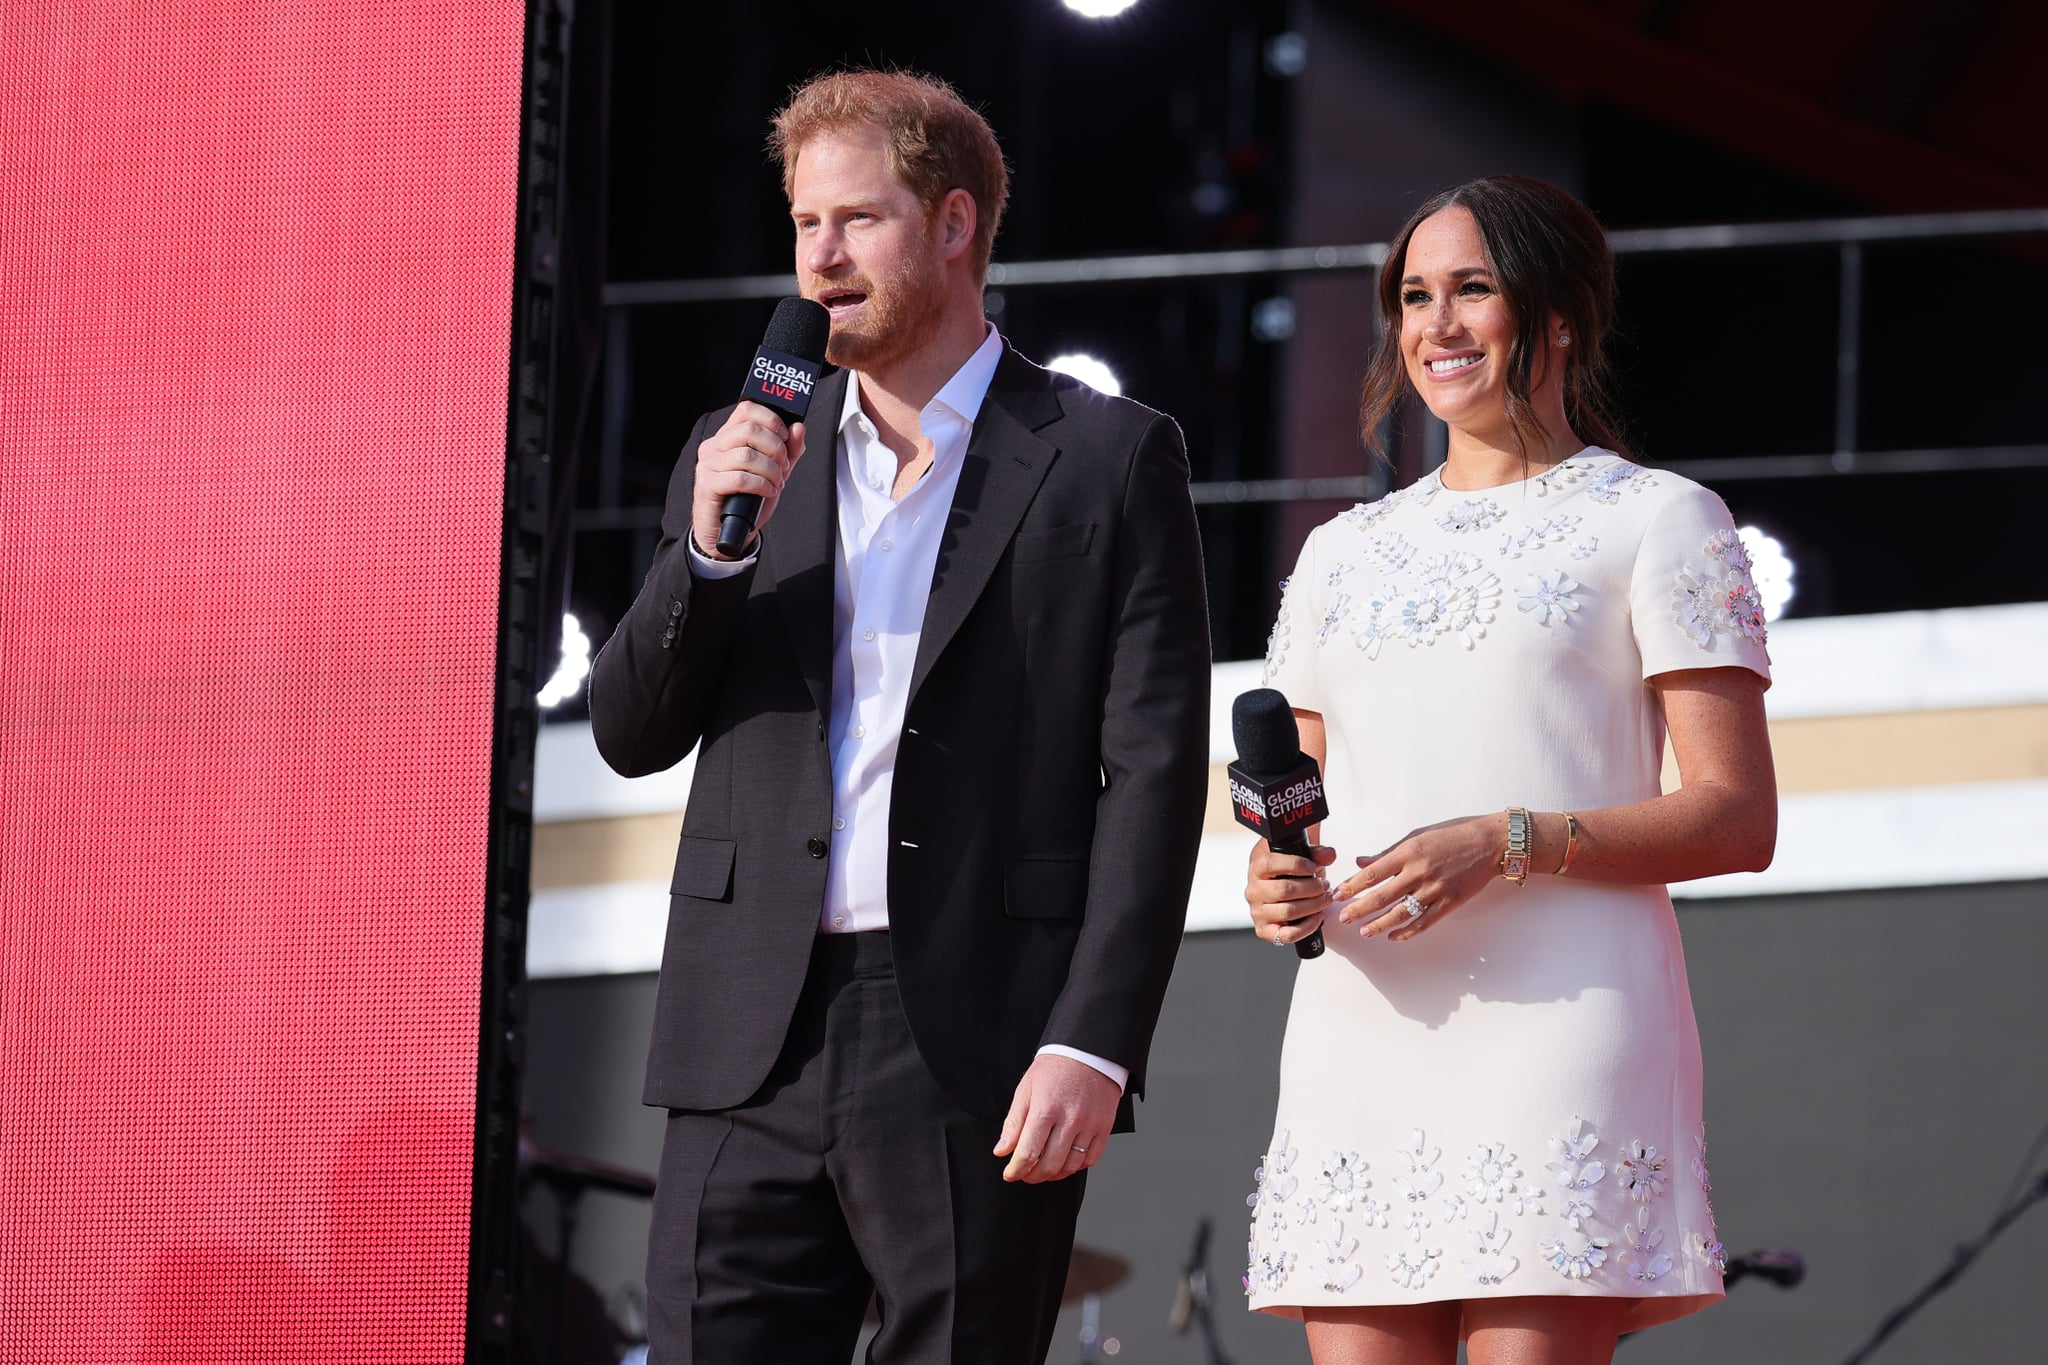 NEW YORK, NEW YORK - SEPTEMBER 25: Prince Harry, Duke of Sussex and Meghan, Duchess of Sussex speak onstage during Global Citizen Live, New York on September 25, 2021 in New York City. (Photo by Theo Wargo/Getty Images for Global Citizen)